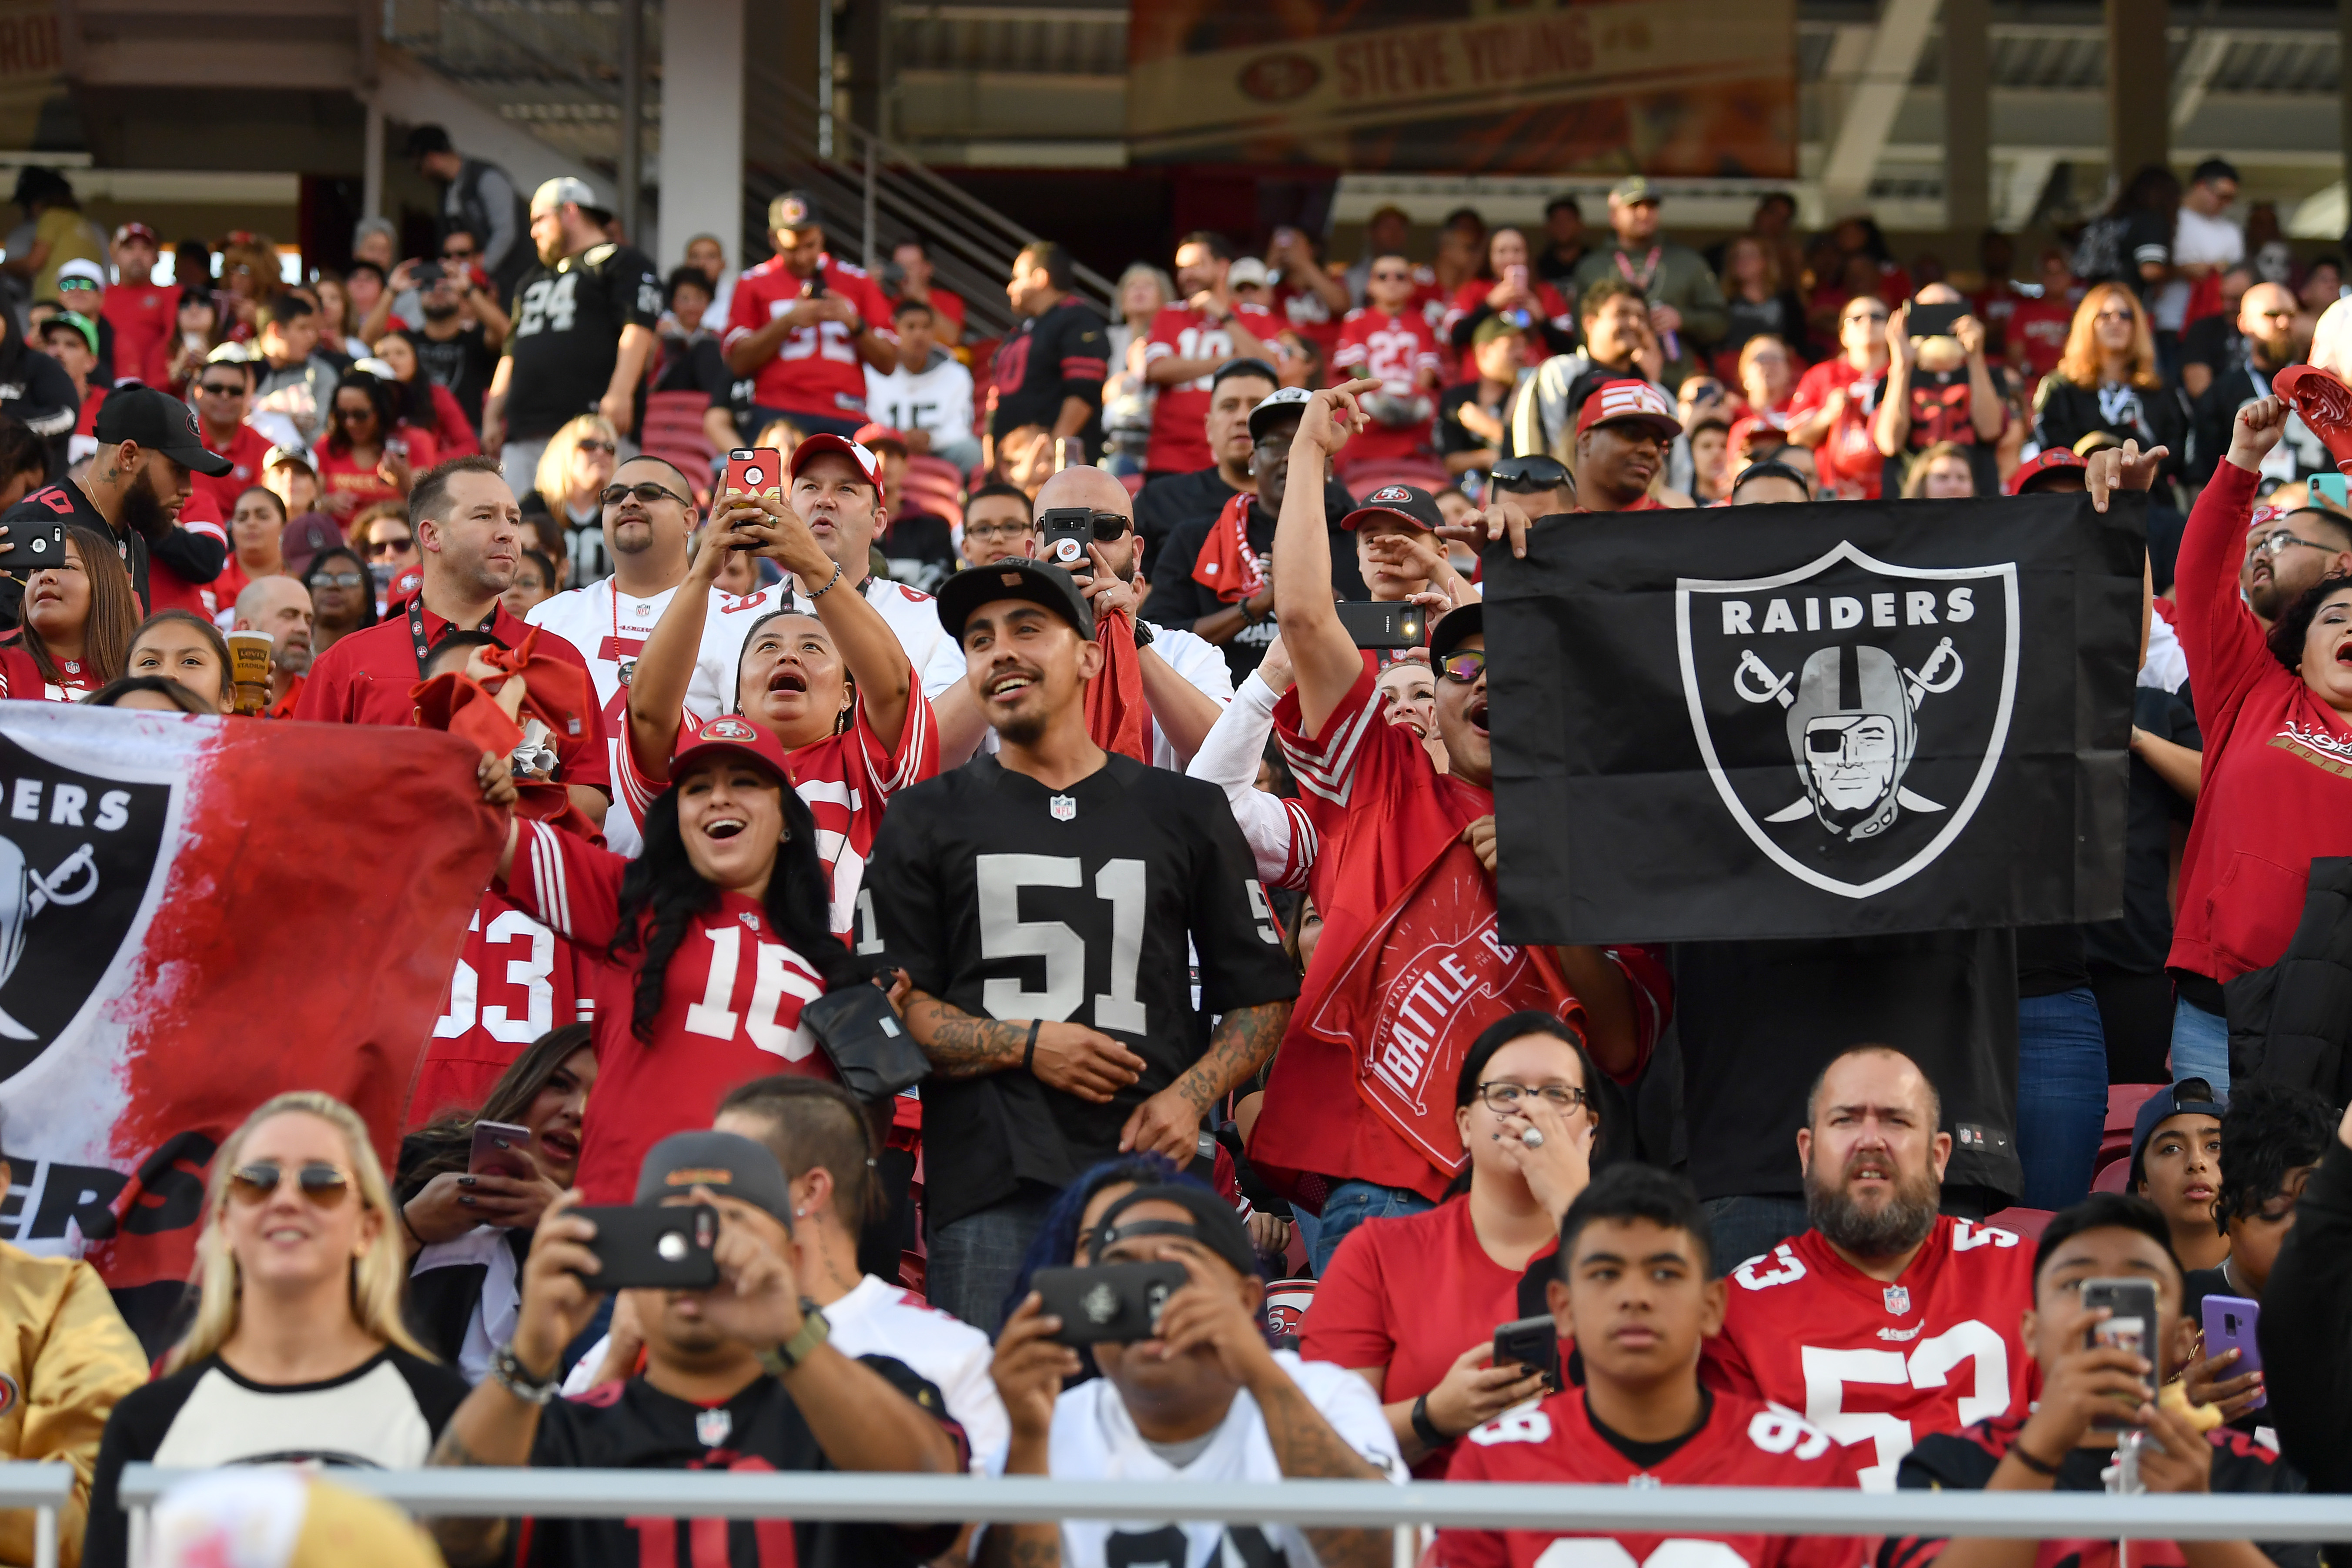 2019 Raiders Season at Levi's Stadium Would Add $1 Million to City's Bottom  Line - The Silicon Valley Voice